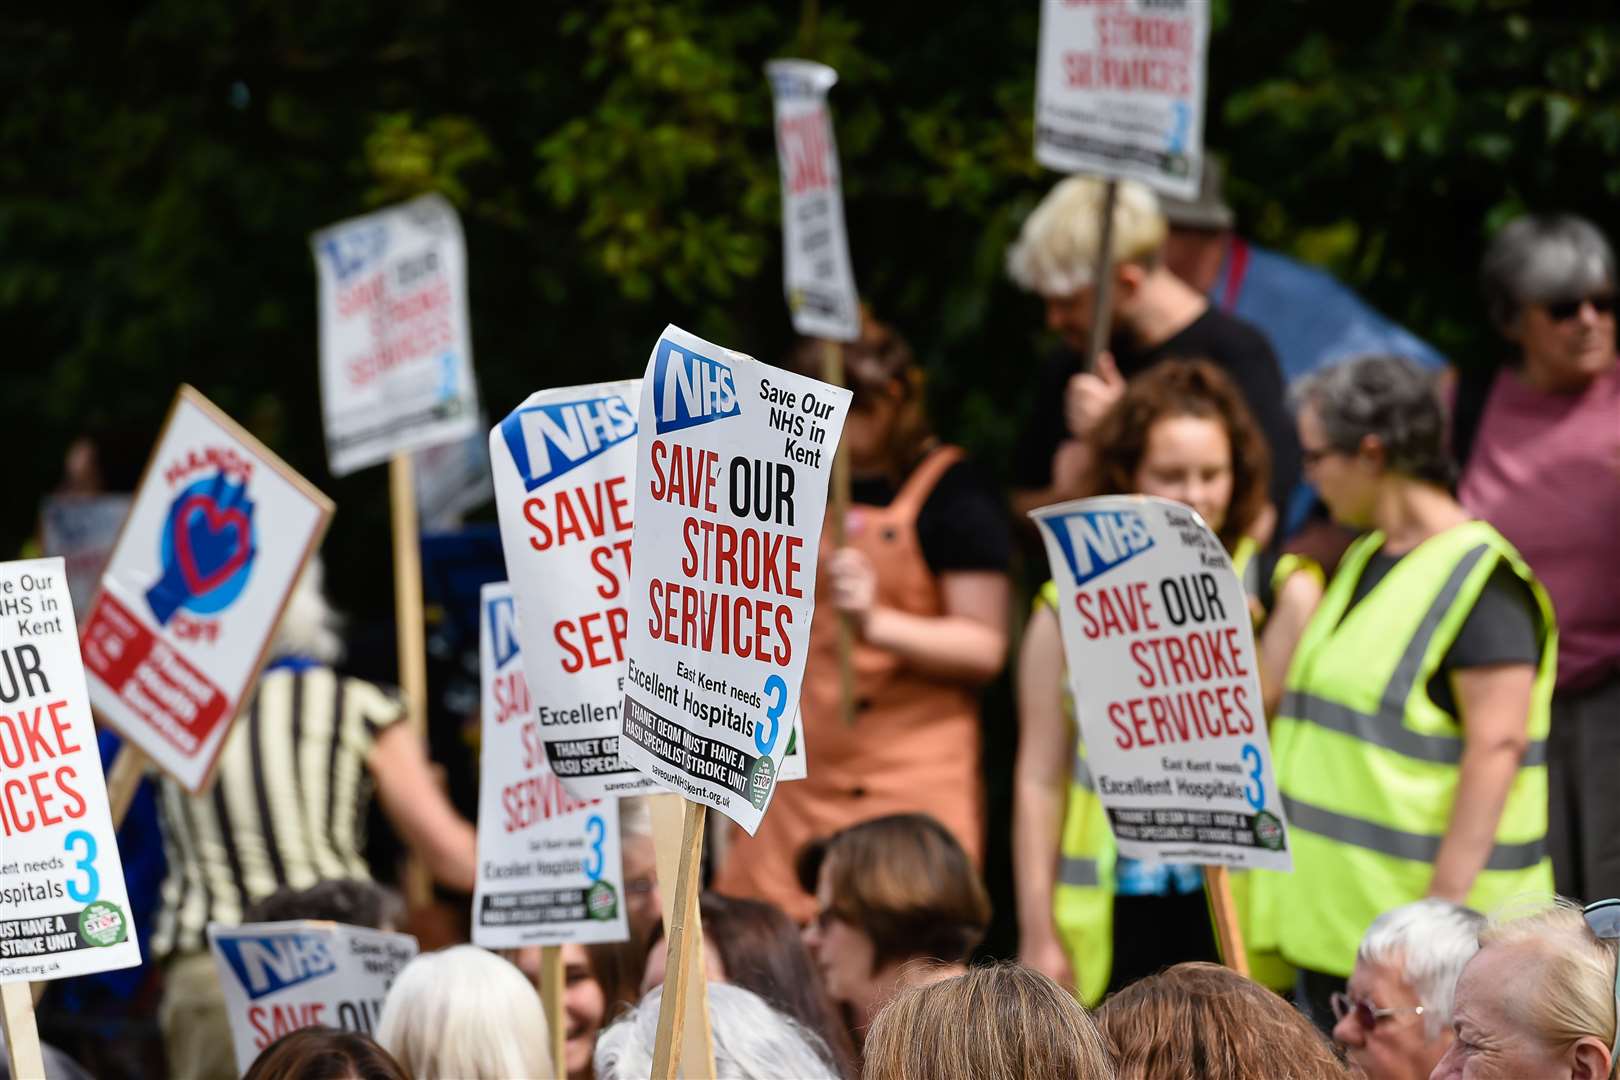 Protest against reducing health and hospital services at the QEQM hosted by Sonik (Save Our NHS in Kent) in August 2019